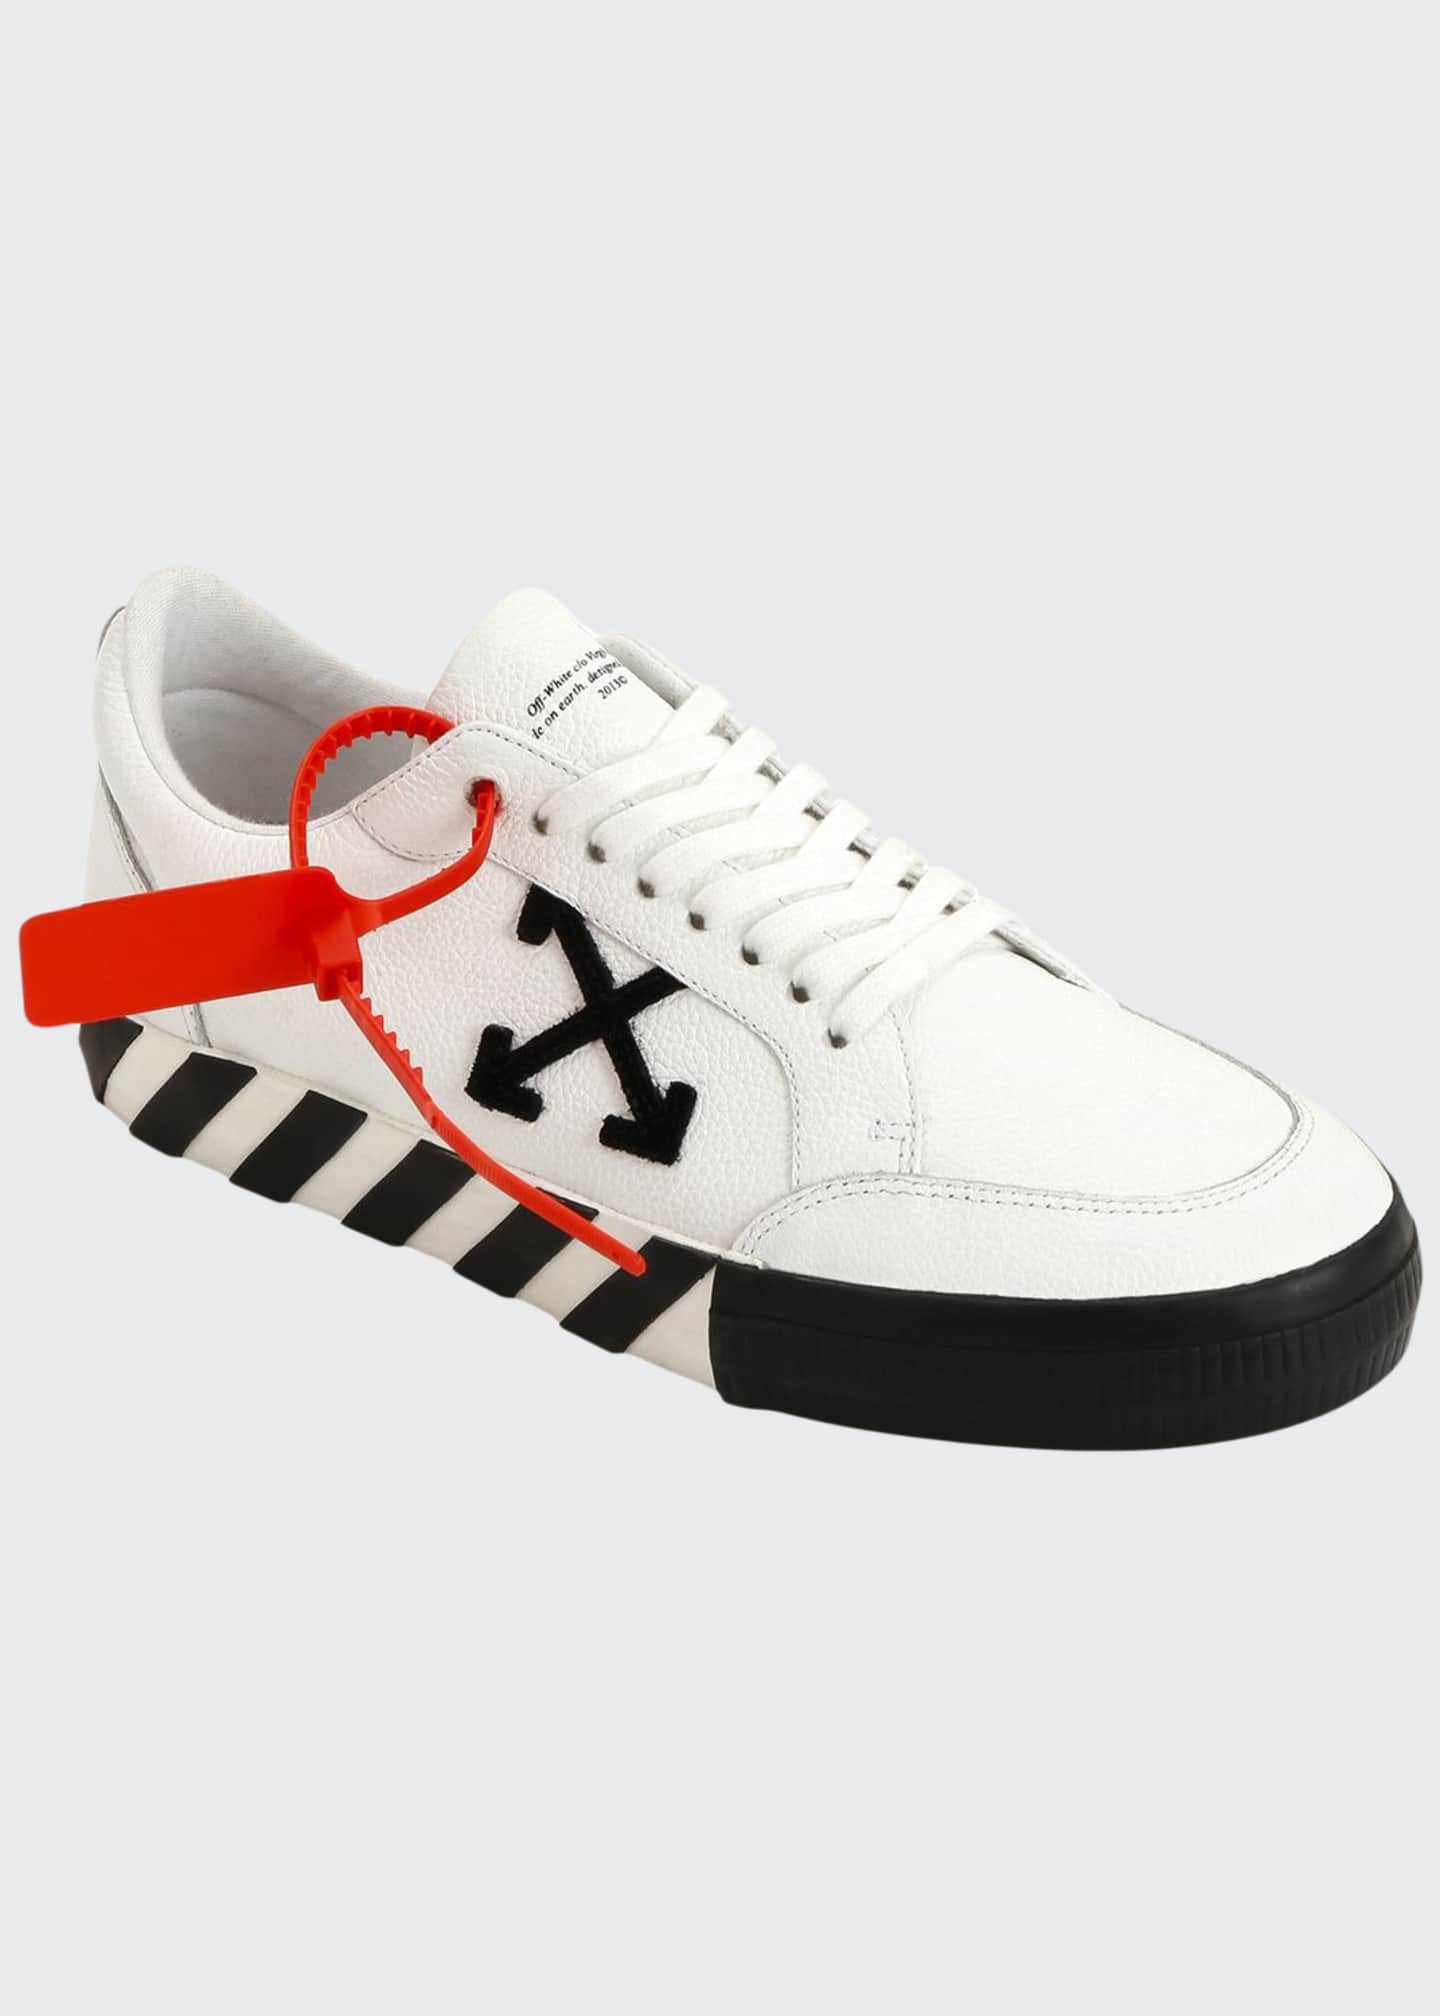 Off-White Men's Arrow Leather Sneakers with Stripes - Bergdorf Goodman